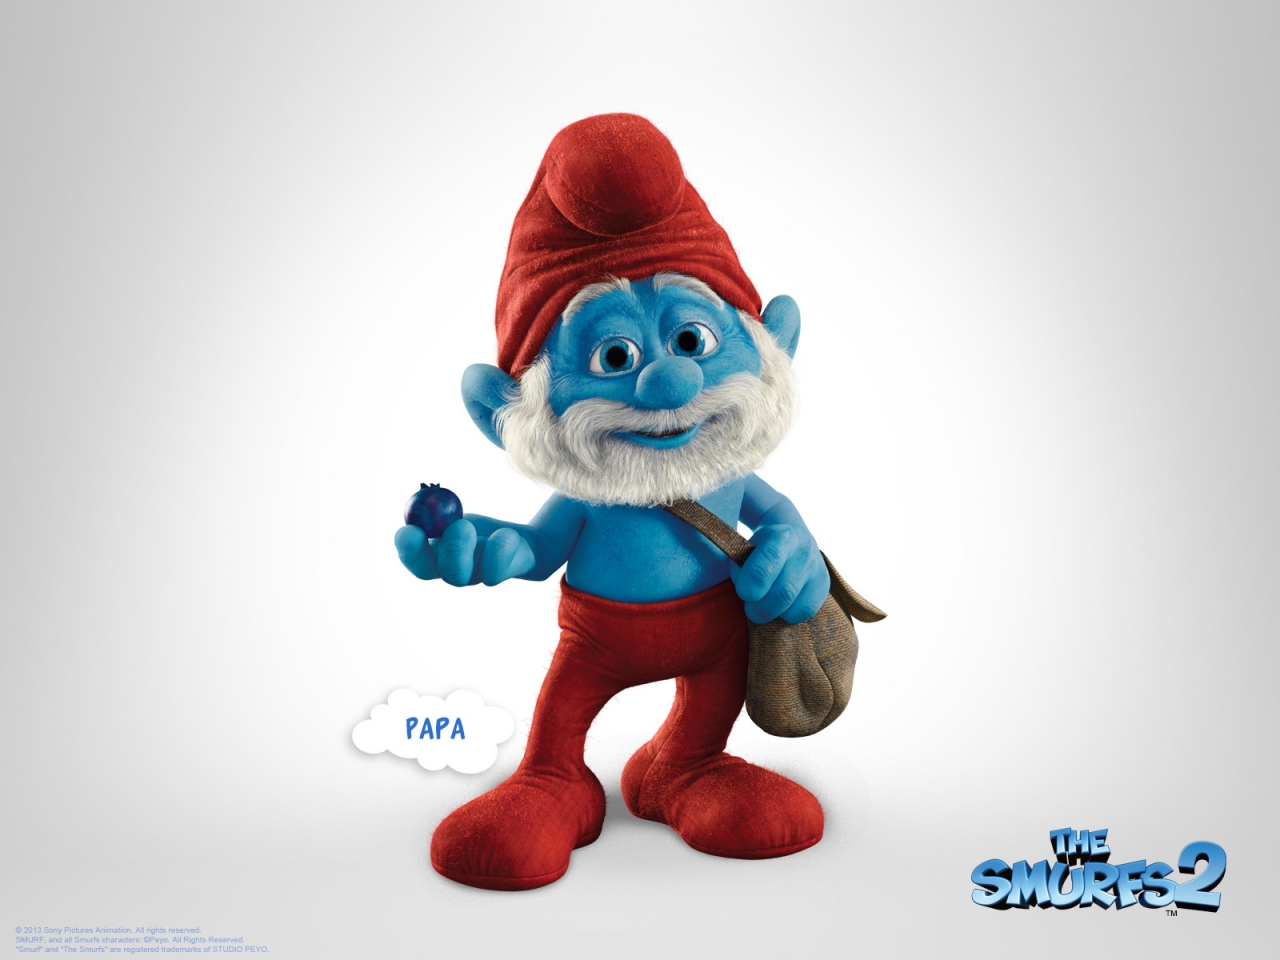 Papa The Smurfs 2 for 1280 x 960 resolution